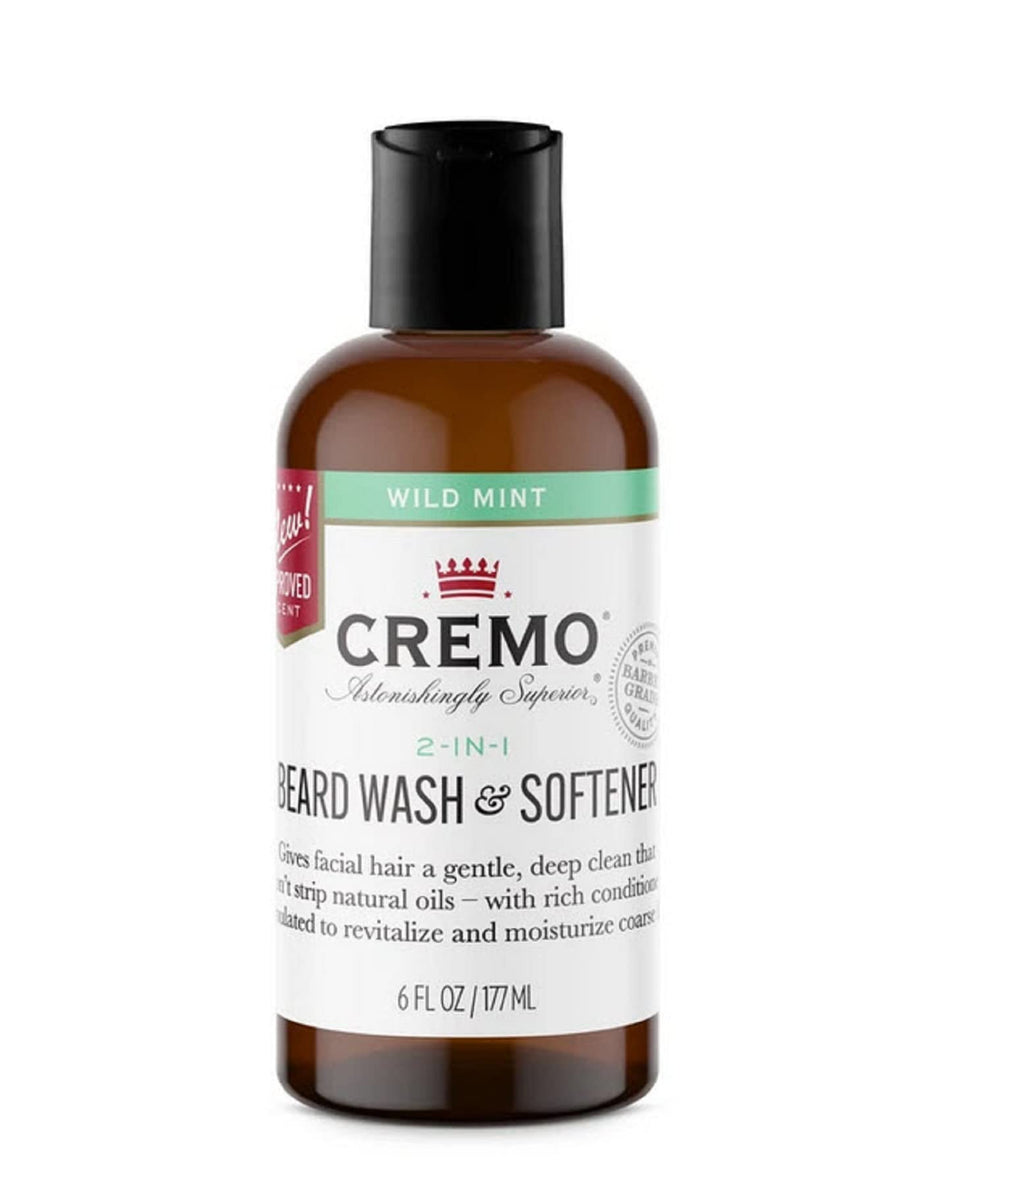 [Australia] - Cremo Wild Mint 2 n1 Beard and Face Wash, Specifically Designed to Clean Coarse Facial Hair, 6 Fluid Oz 6 Ounce (Pack of 1) 